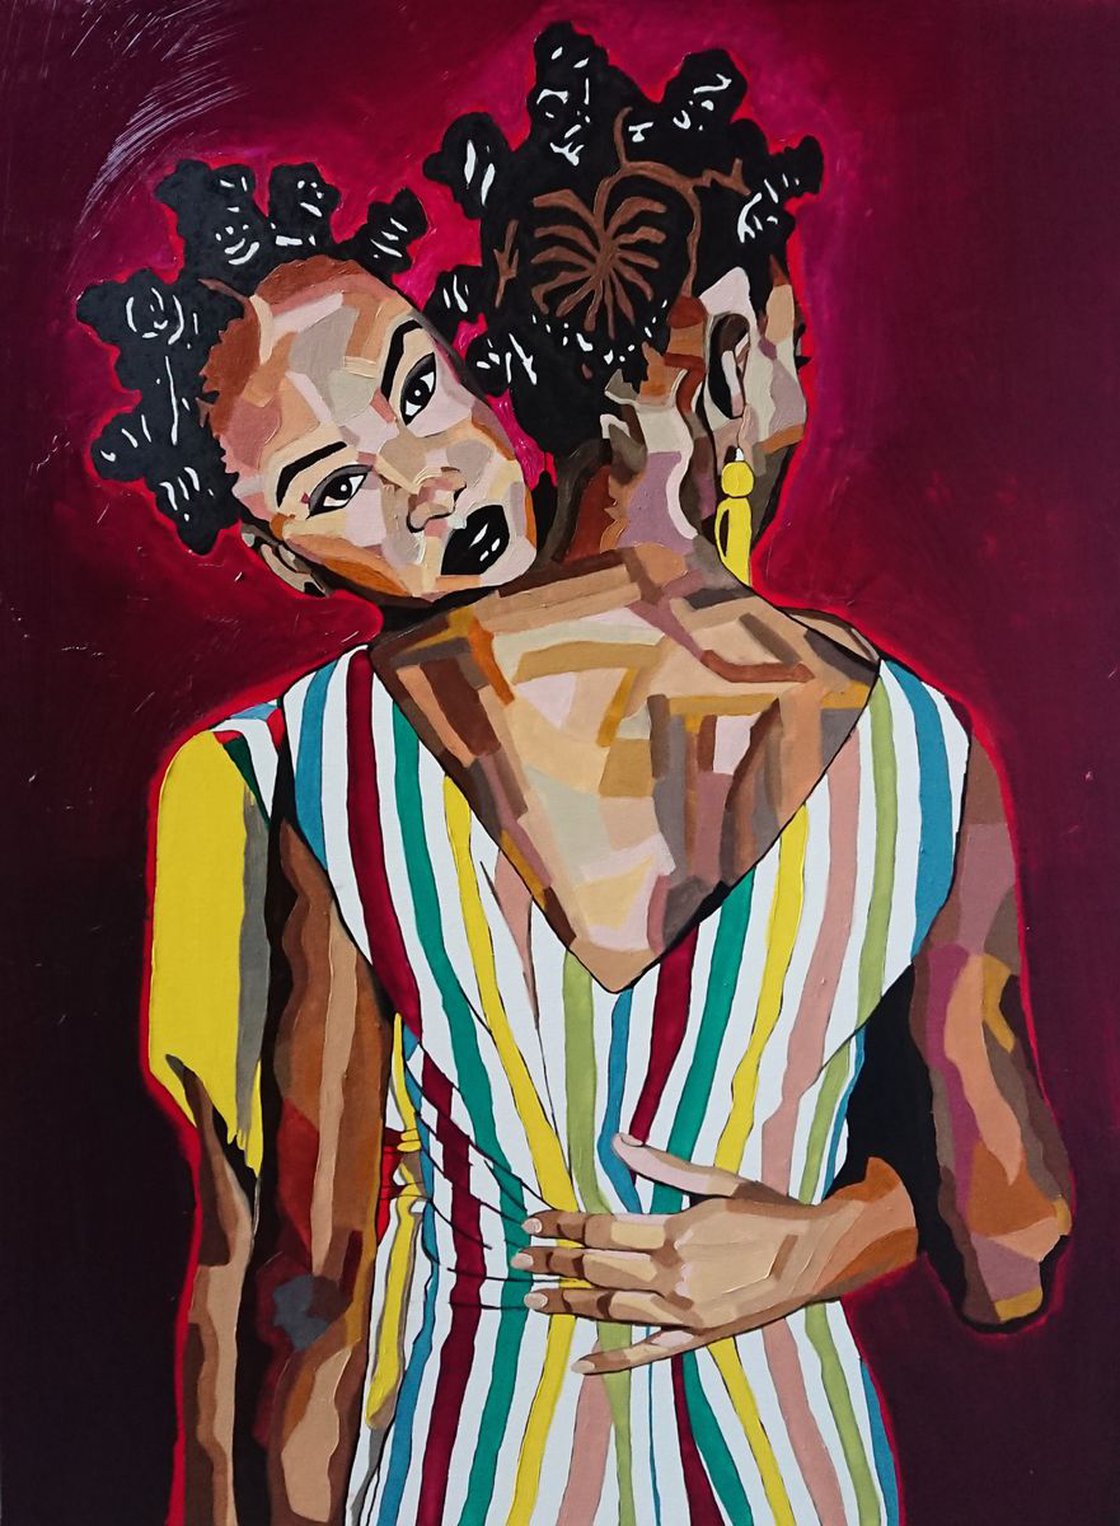 Two black people with Bantu Knots embracing